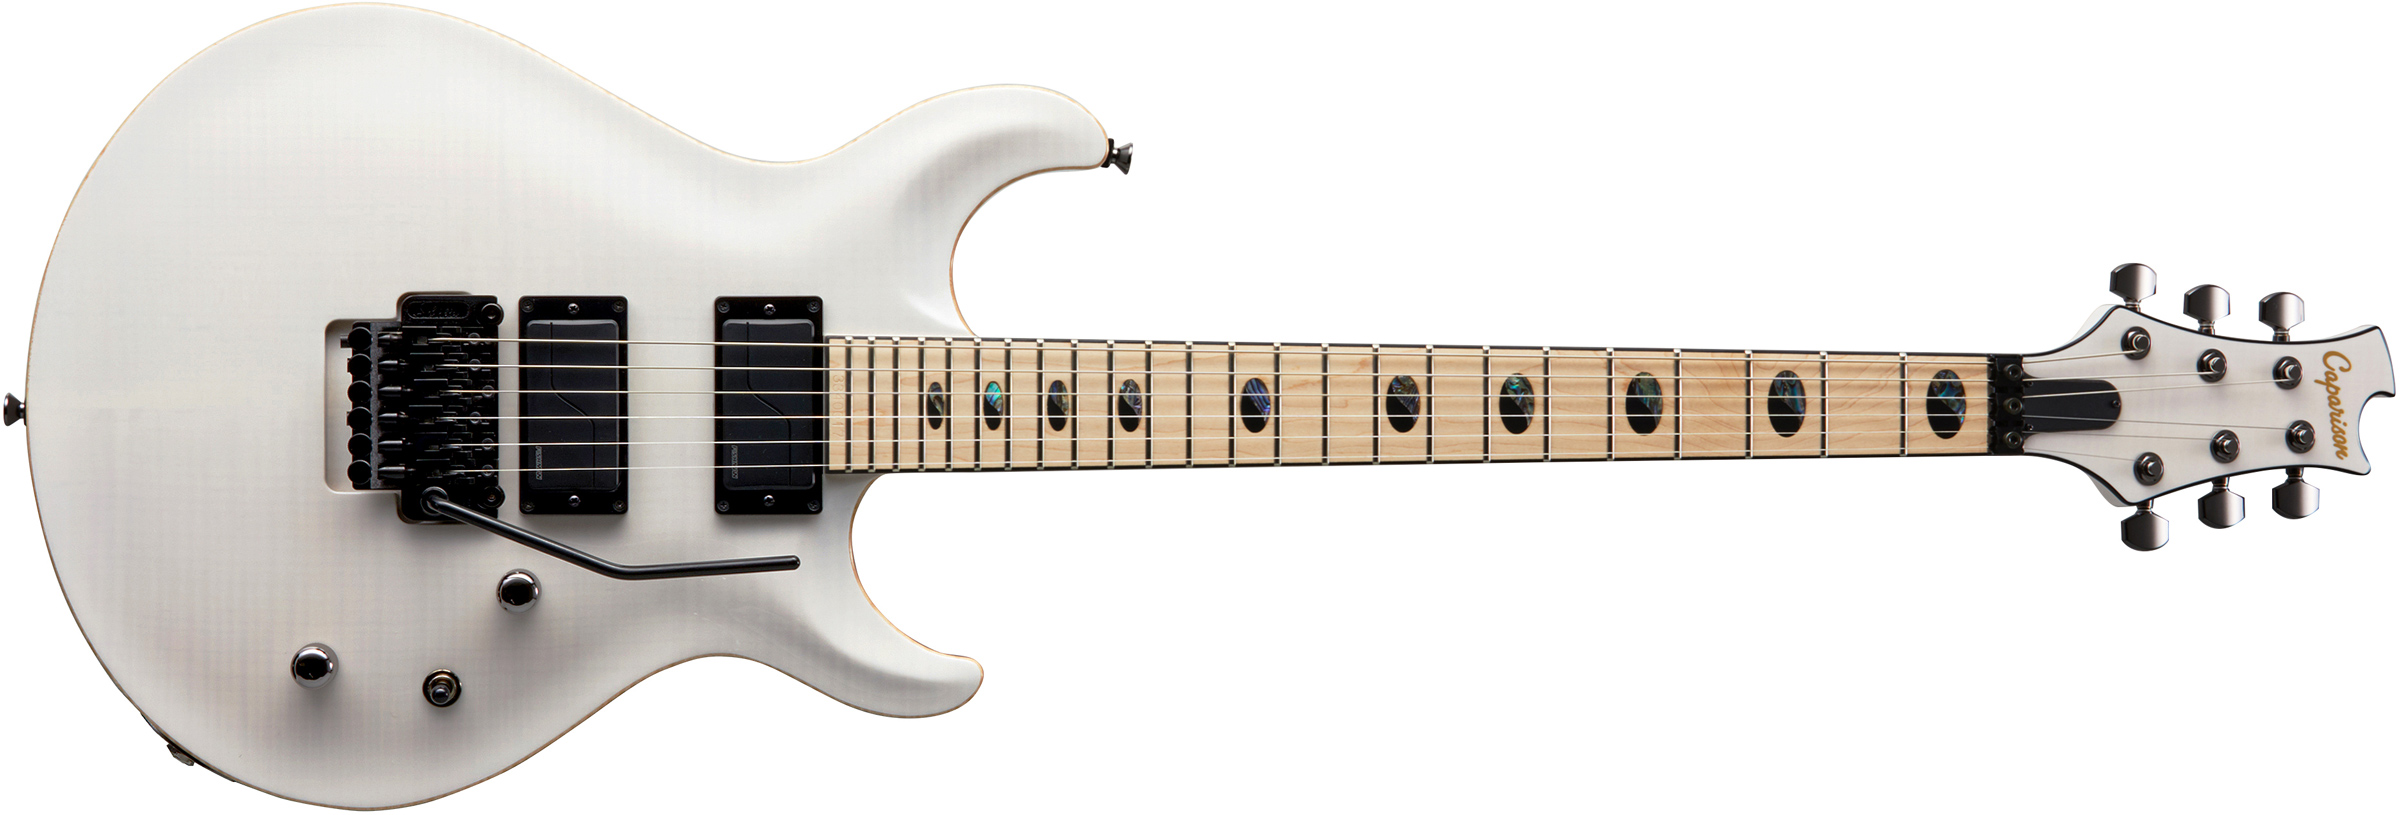 Caparison Guitars Products - Electric Guitars and Basses